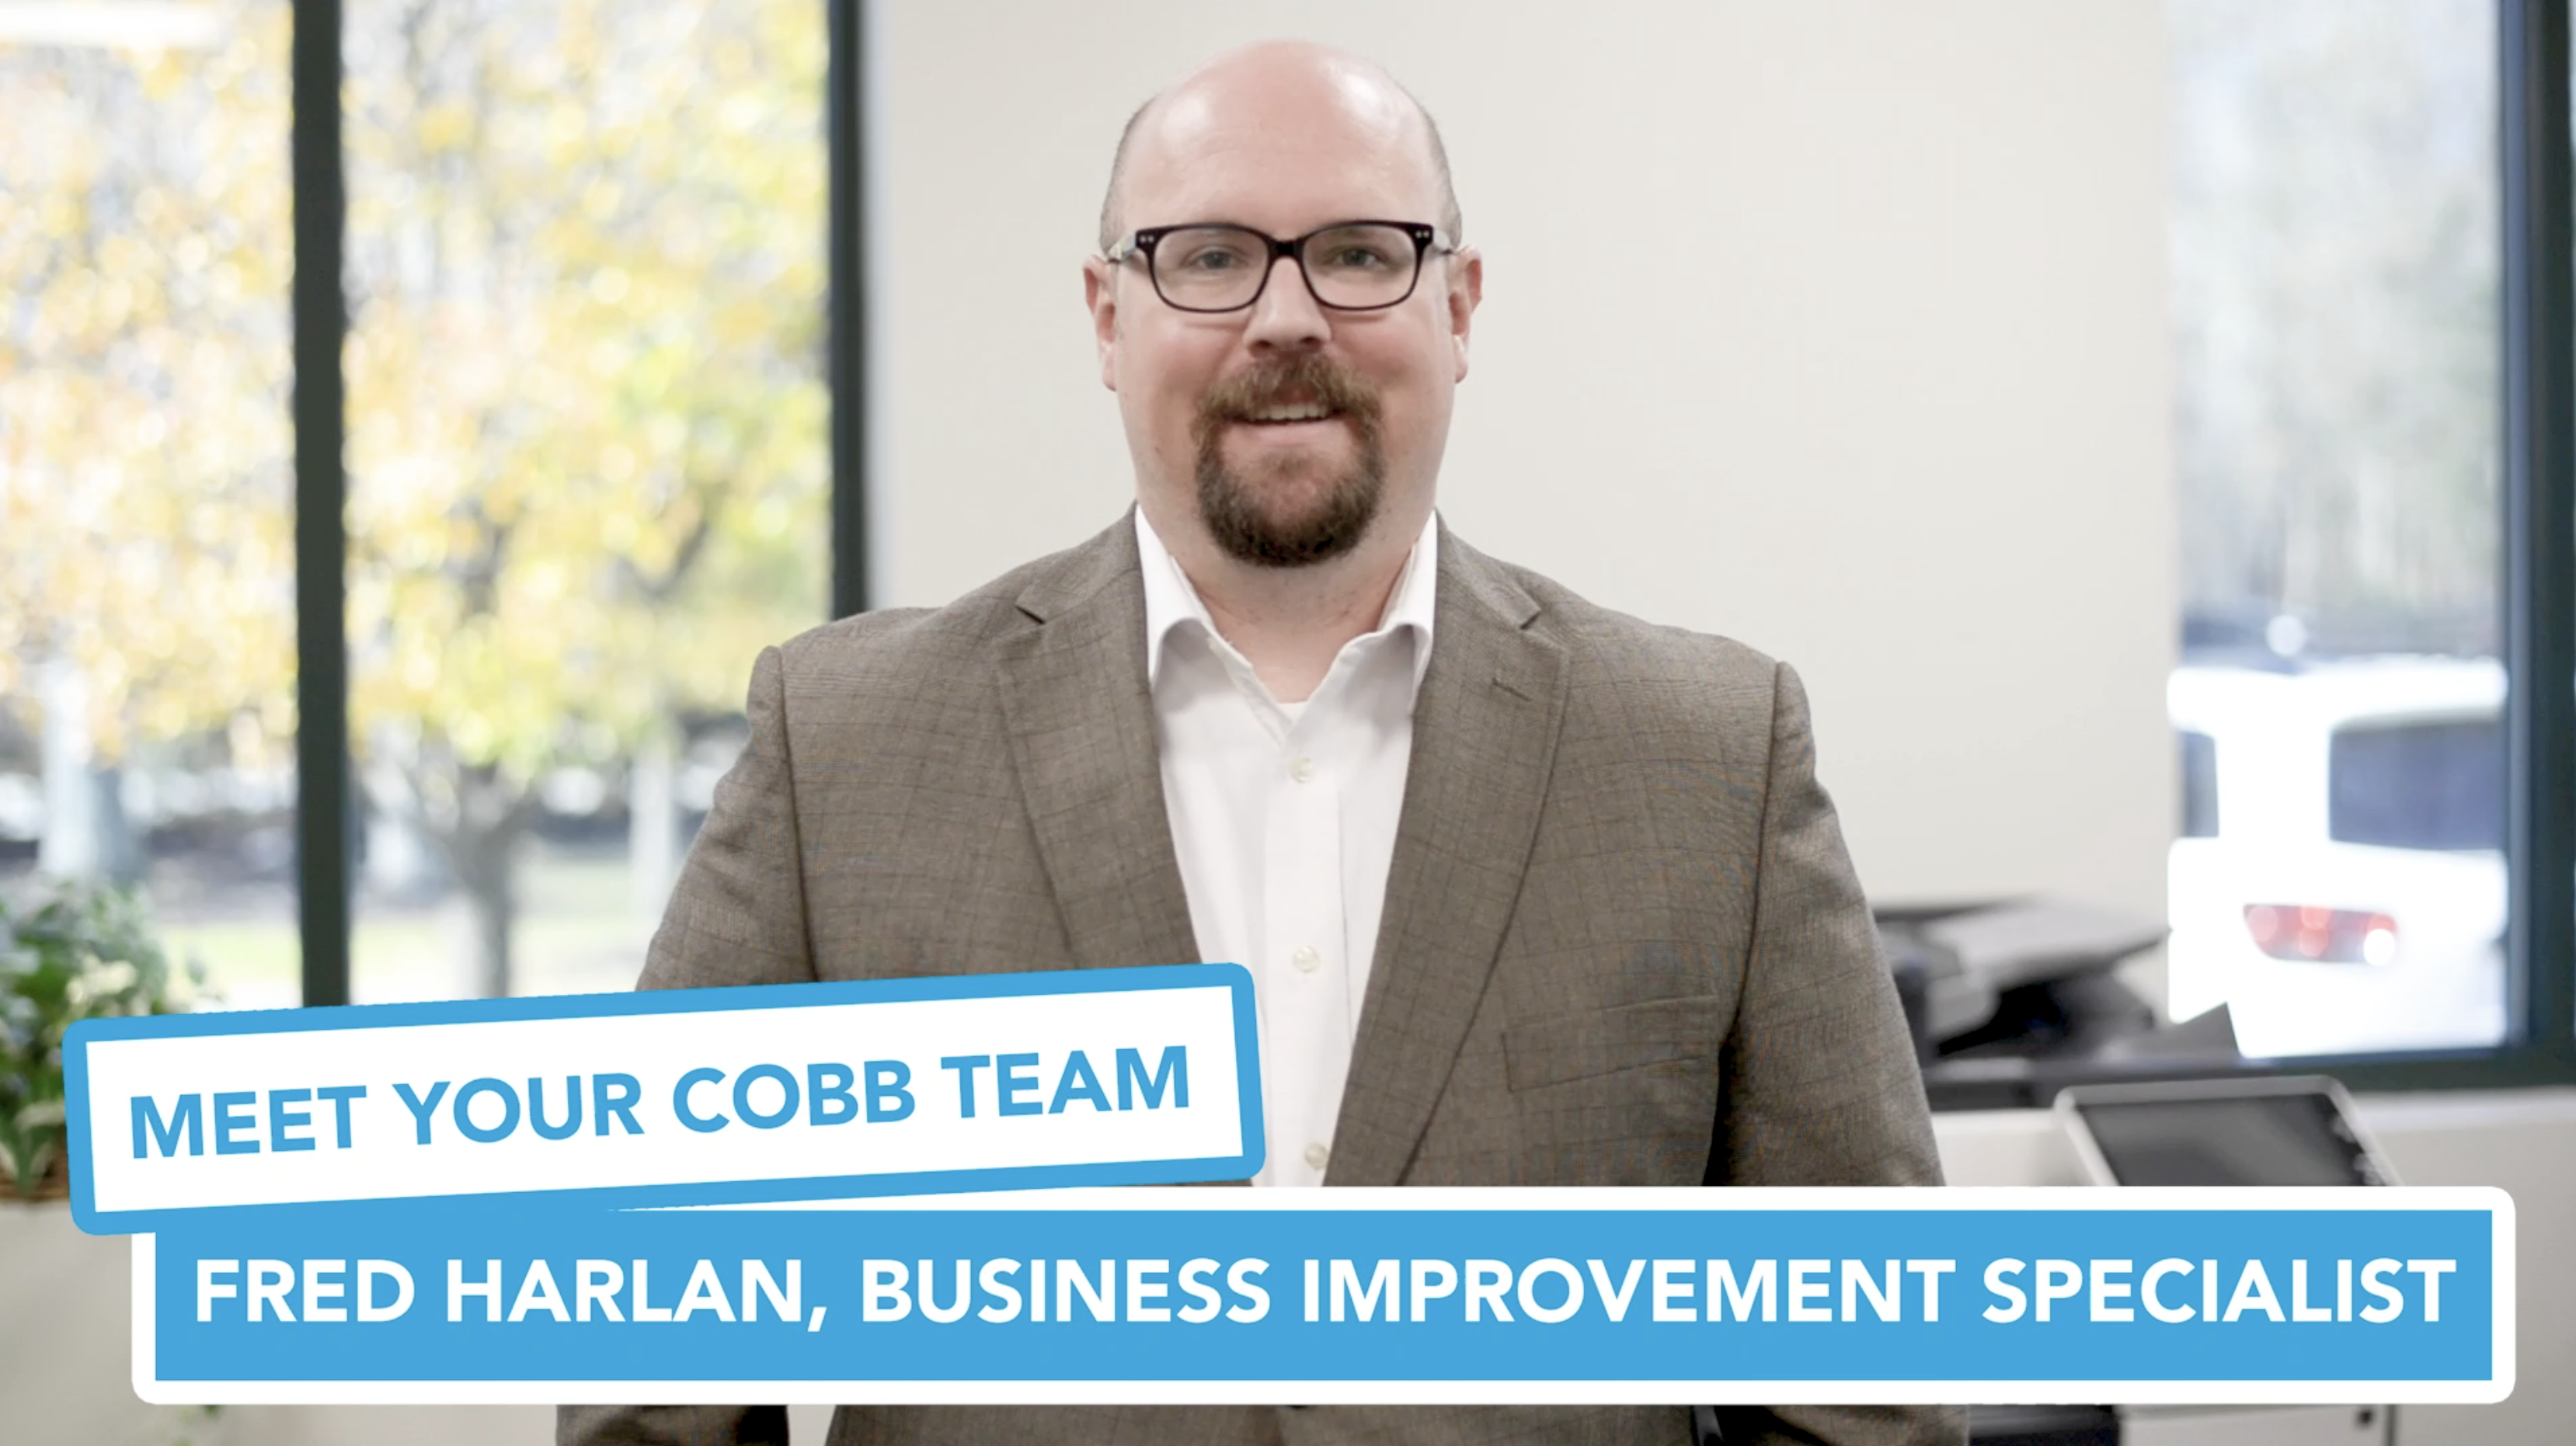 Meet Your Cobb Team: Fred Harlan, Business Improvement Specialist